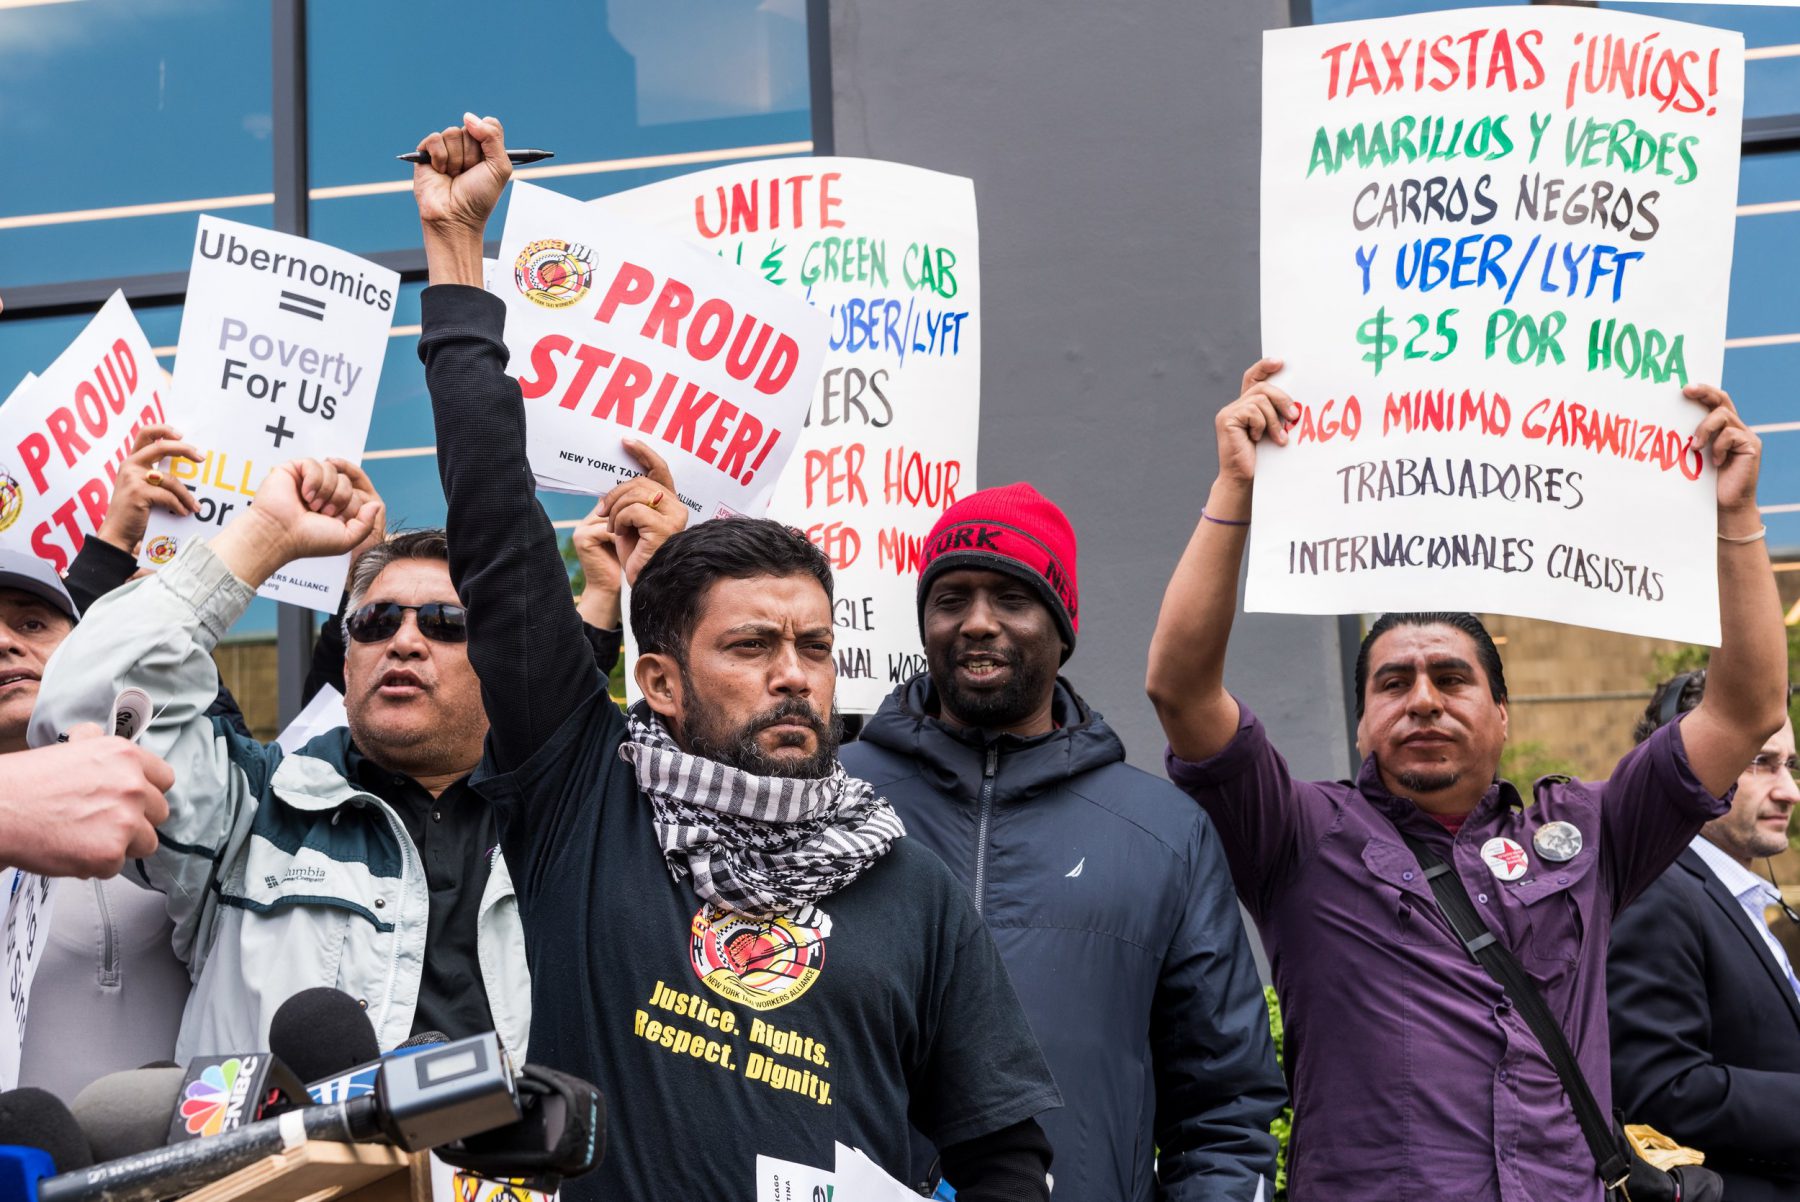 NYC cab drivers rallied in front of the Uber and Lyft offices in Long Island City, New York protesting Uber